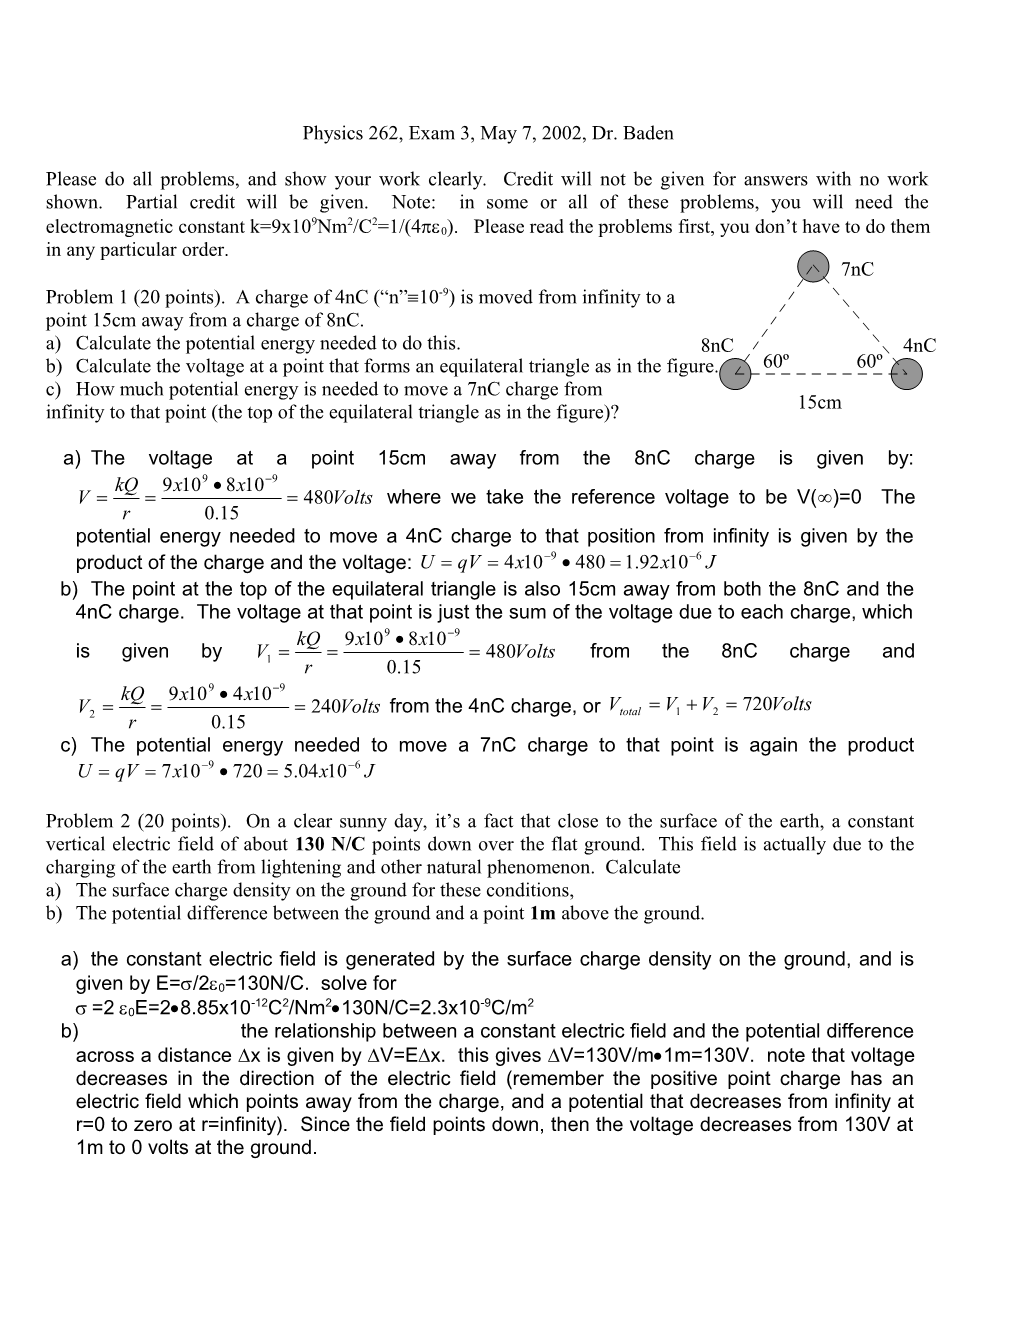 Physics 262, Exam 1, March 1, 2001, Dr